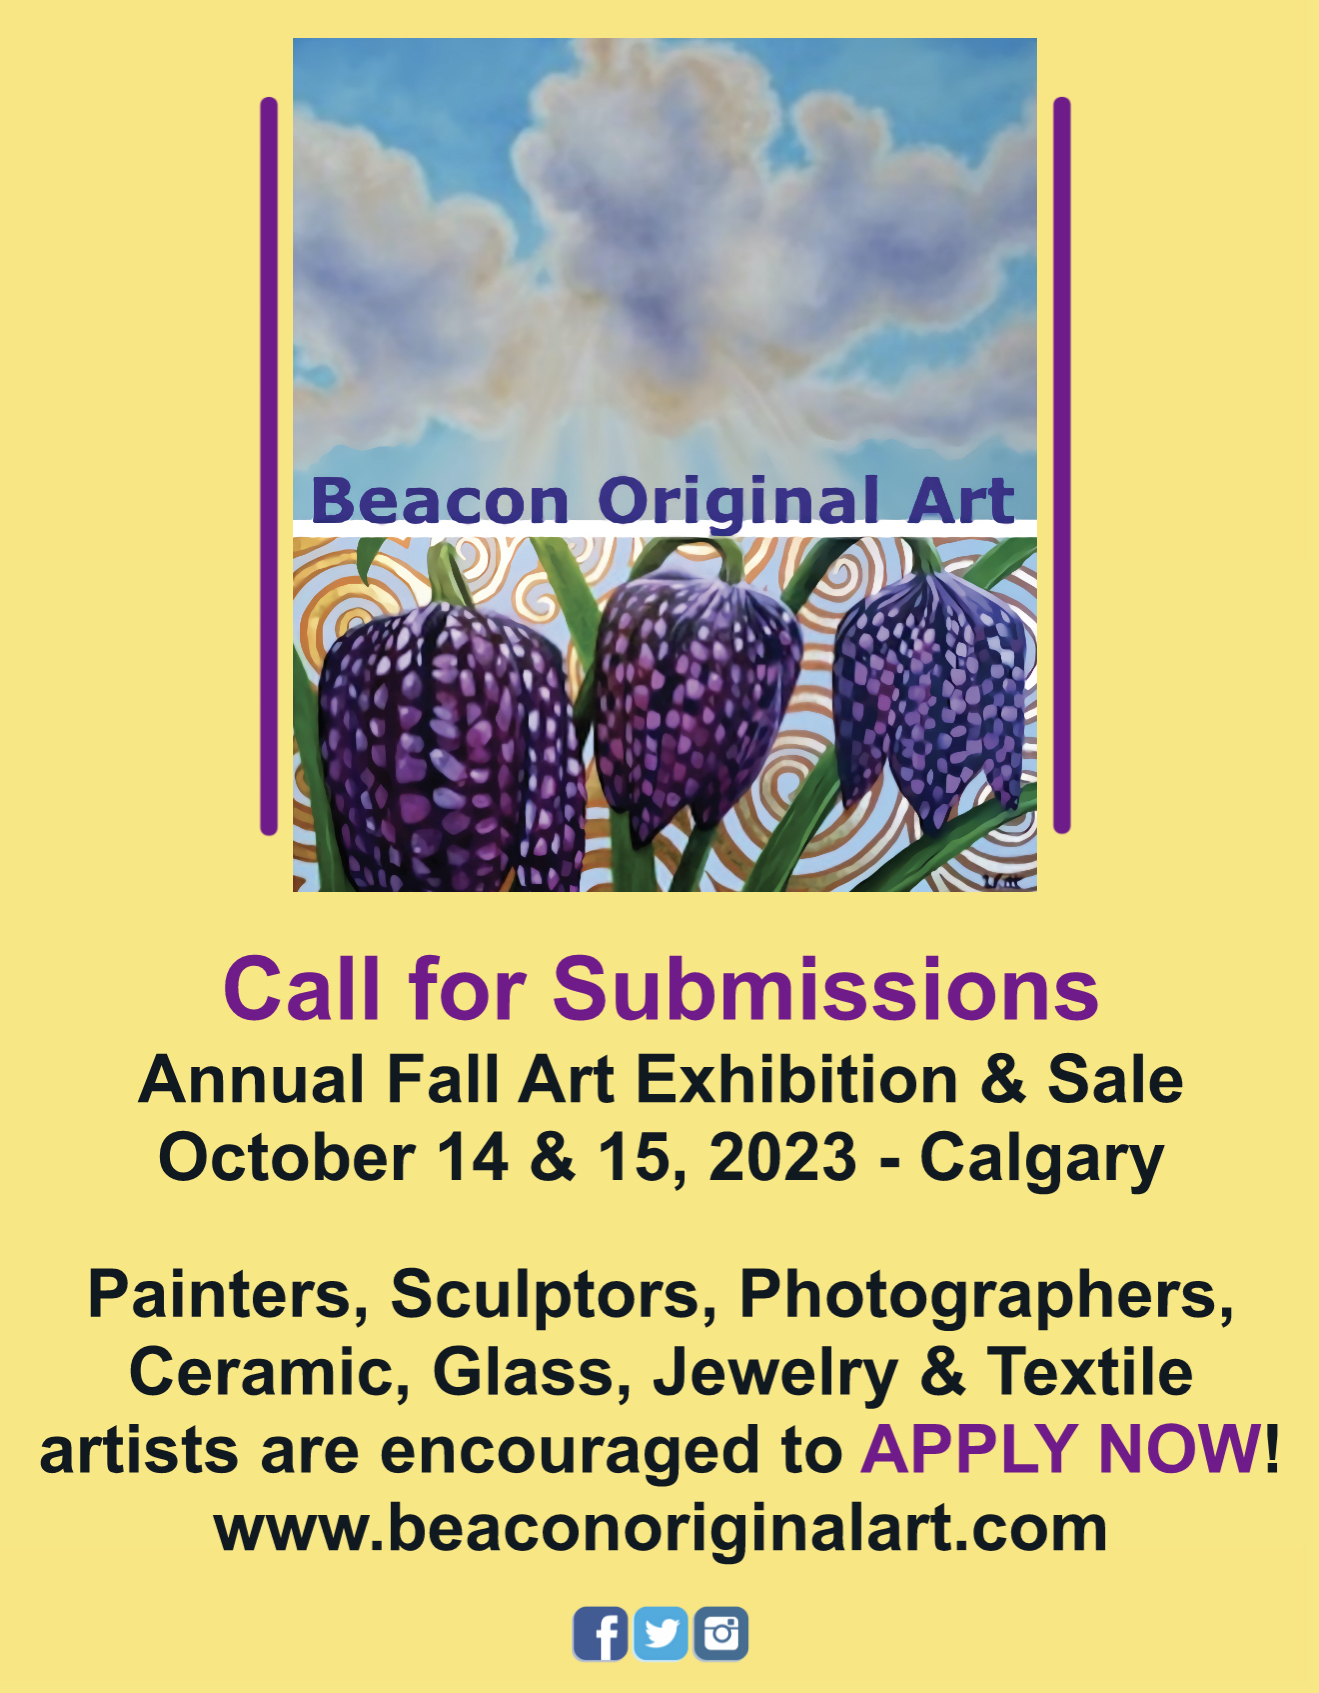 Call for Submissions Annual Fall Art Exhibition & Sale October 14 & 15, 2023 - Calgary Painters, Sculptors, Photographers, Ceramic, Glass, Jewelry & Textile artists are encouraged to APPLY NOW! www.beaconoriginalart.com 